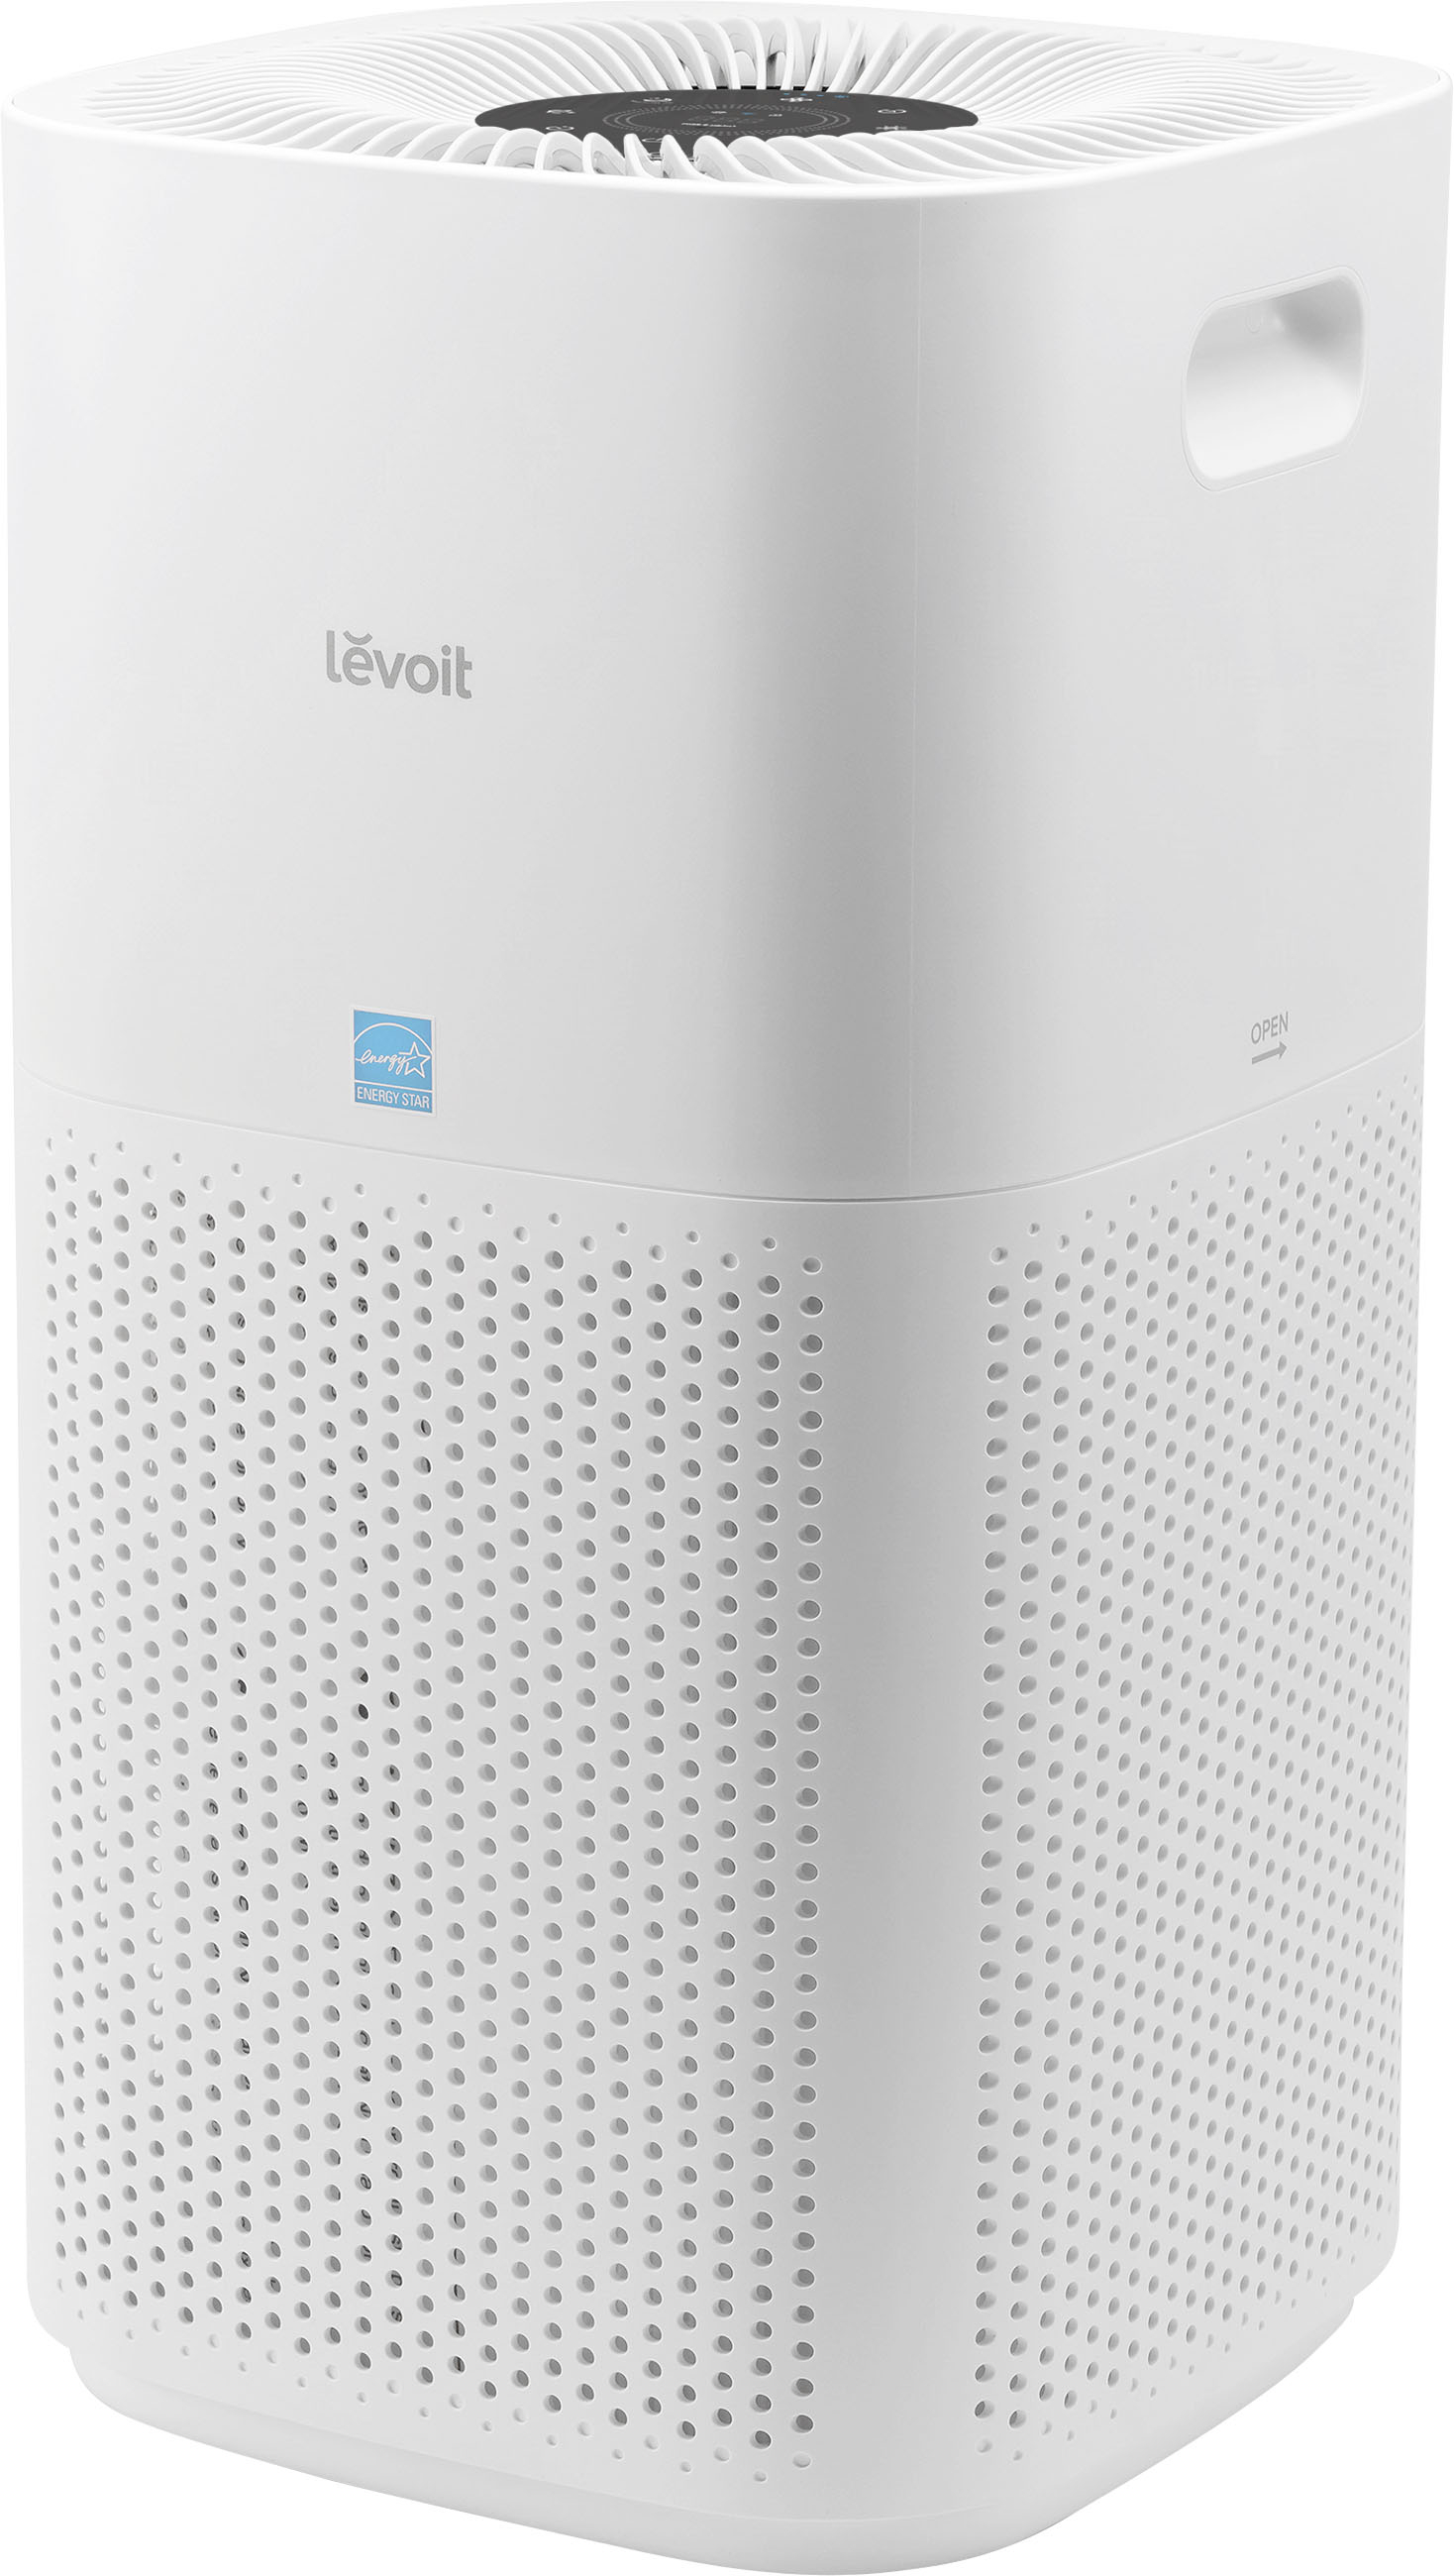 Levoit Air Purifier - general for sale - by owner - craigslist